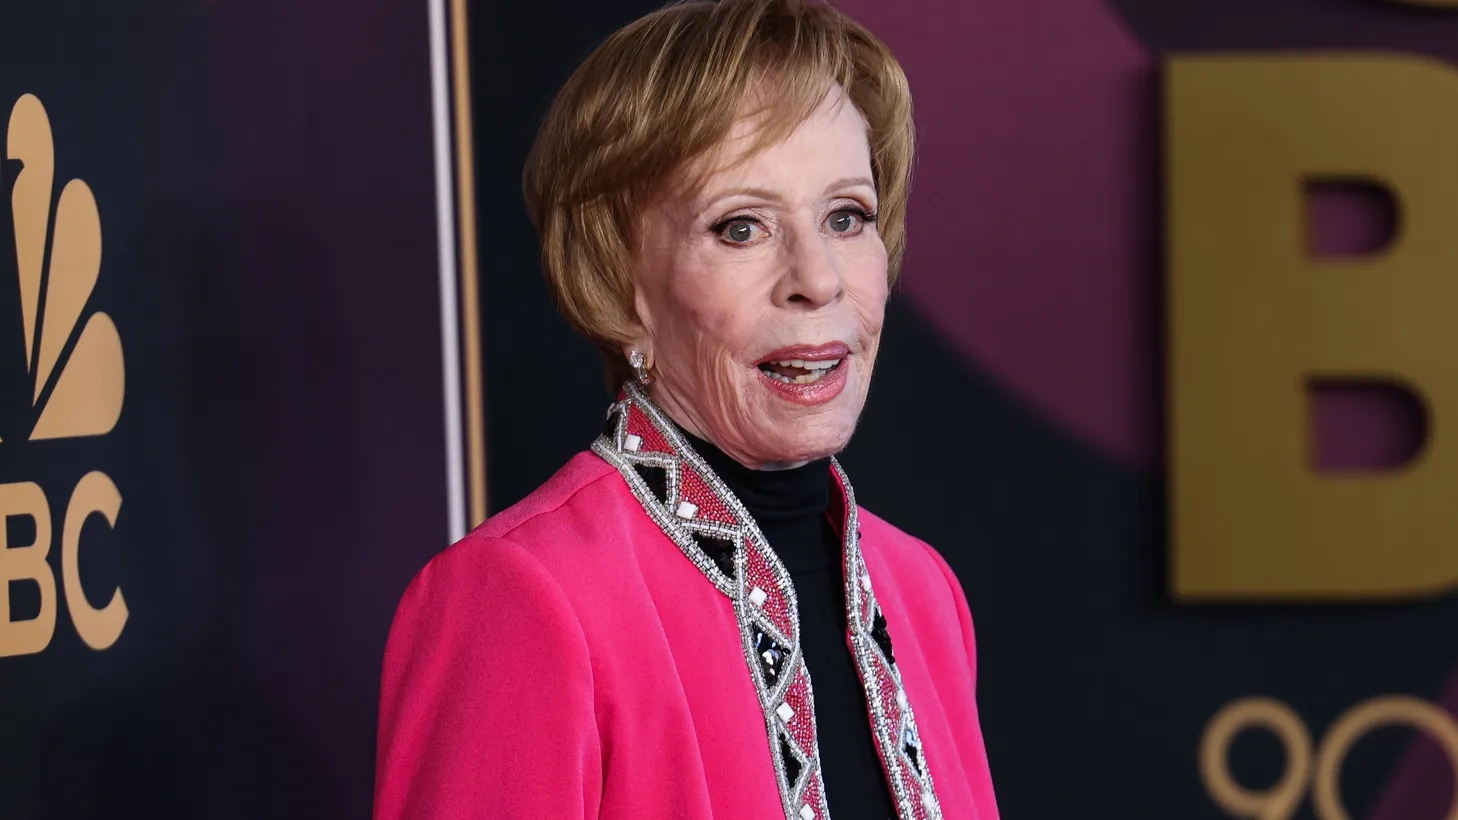 American actress, comedian, singer and writer Carol Burnett arrives at NBC's “Carol Burnett: 90 Years Of Laughter + Love” birthday special held at AVALON Hollywood and Bardot on March 2, 2023 in Hollywood.